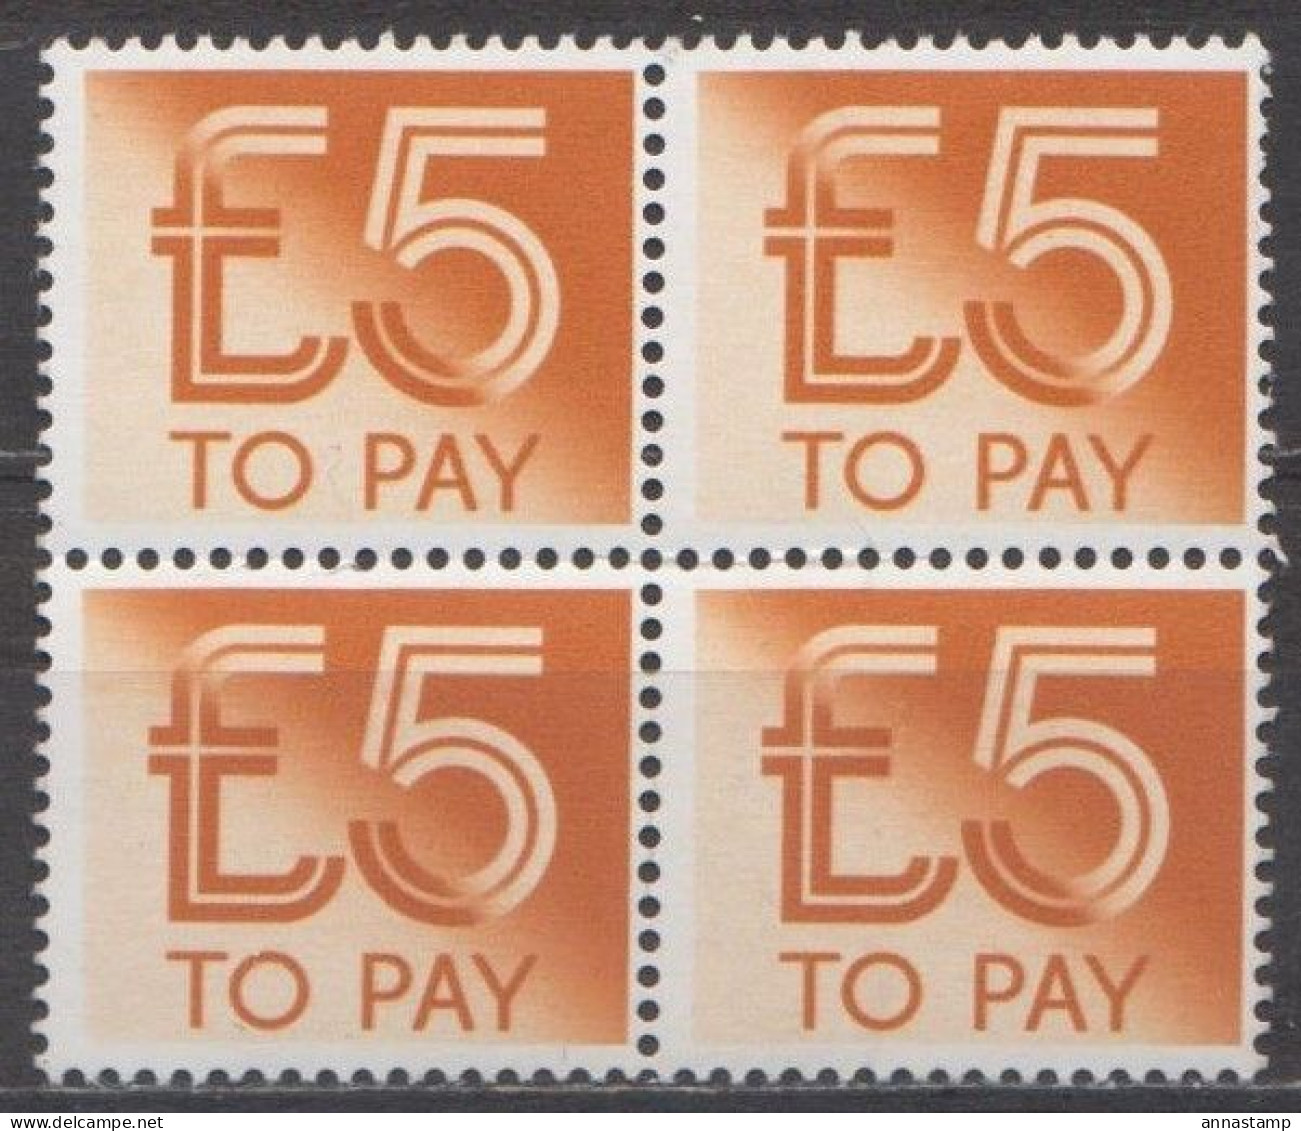 Great Britain MNH Stamp In A Block Of 4 Stamps - Postage Due